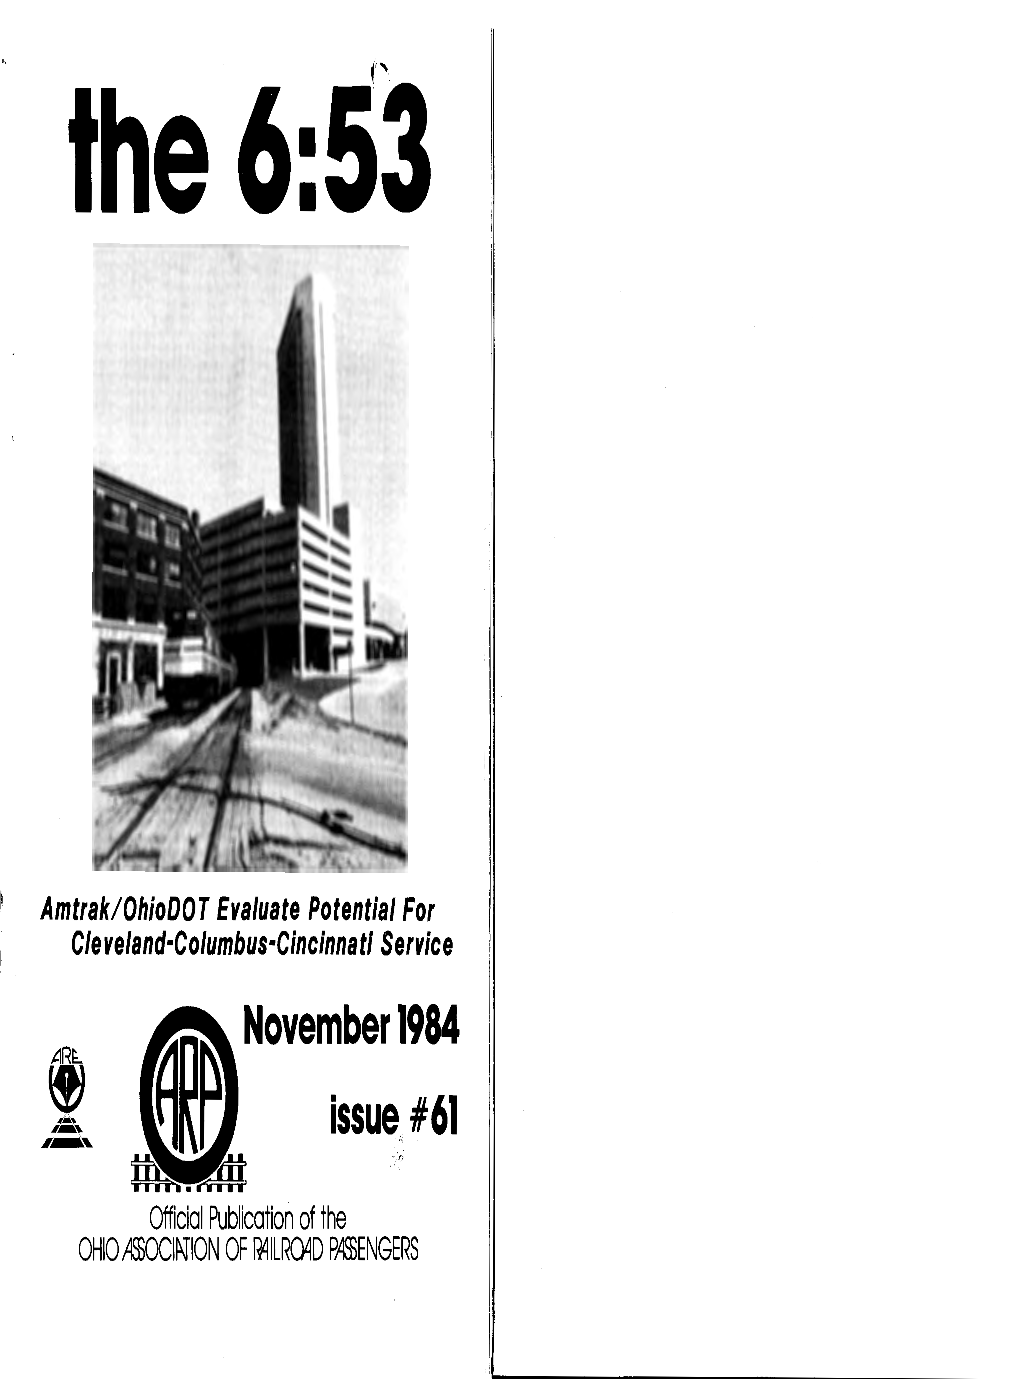 Issue of the 6:53